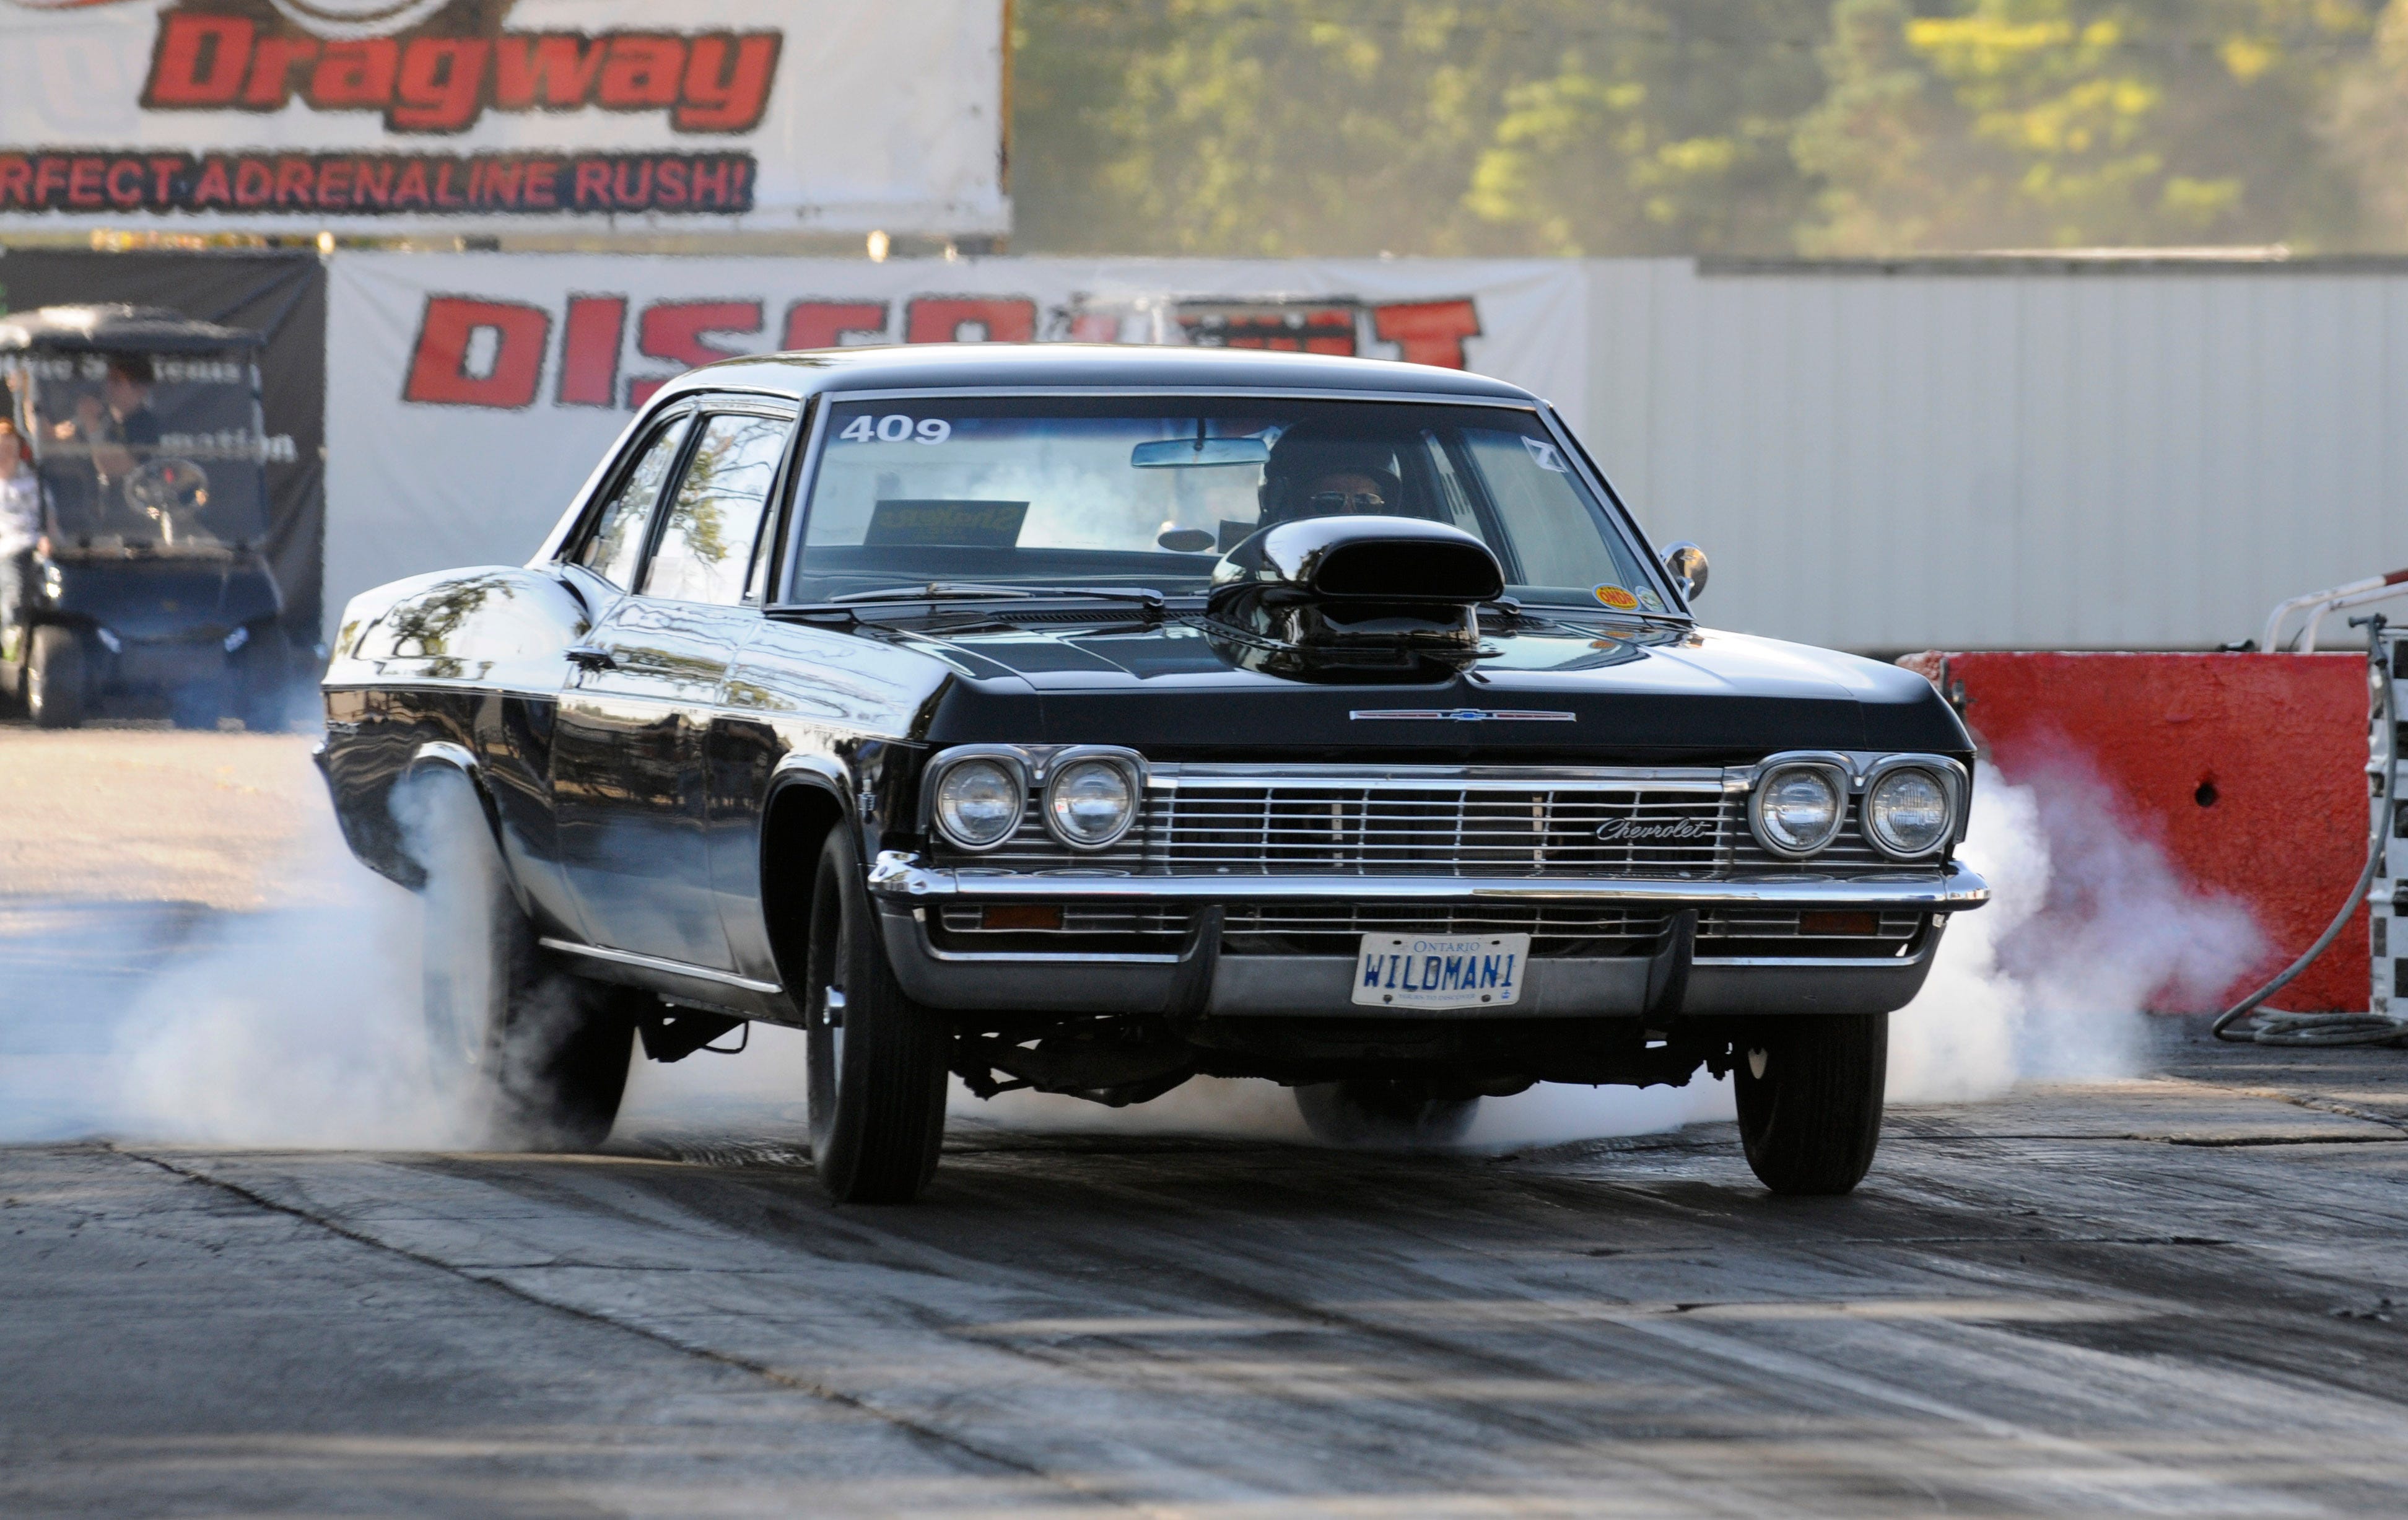 Bob Walker of Windsor performs a burnout in his 1965 Chevrolet Impala with a 409 cubic inch engine, Saturday Sept. 27, 2014, during nostalgia drag racing at Milan Dragway in Milan.